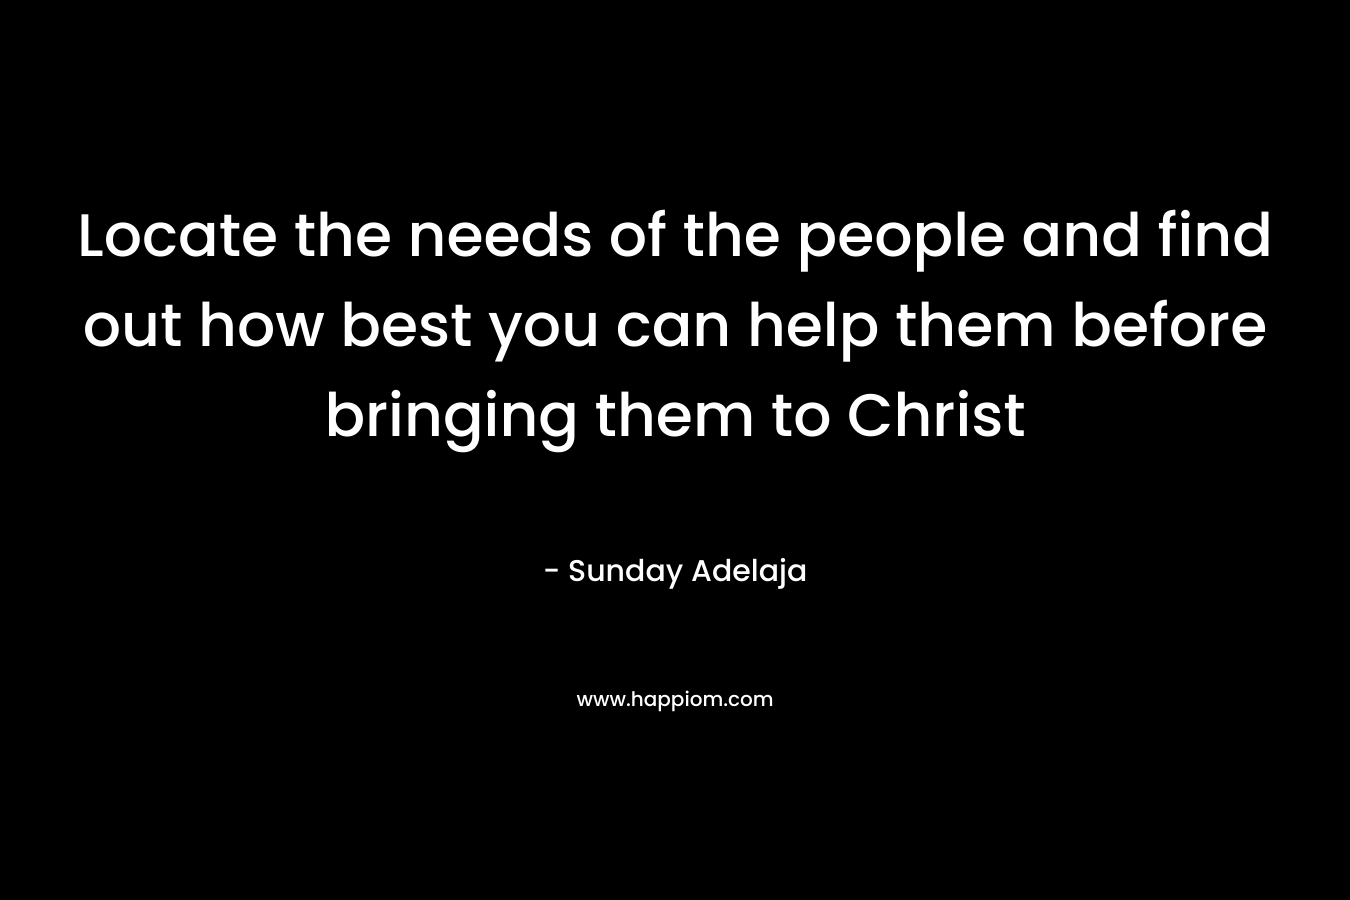 Locate the needs of the people and find out how best you can help them before bringing them to Christ